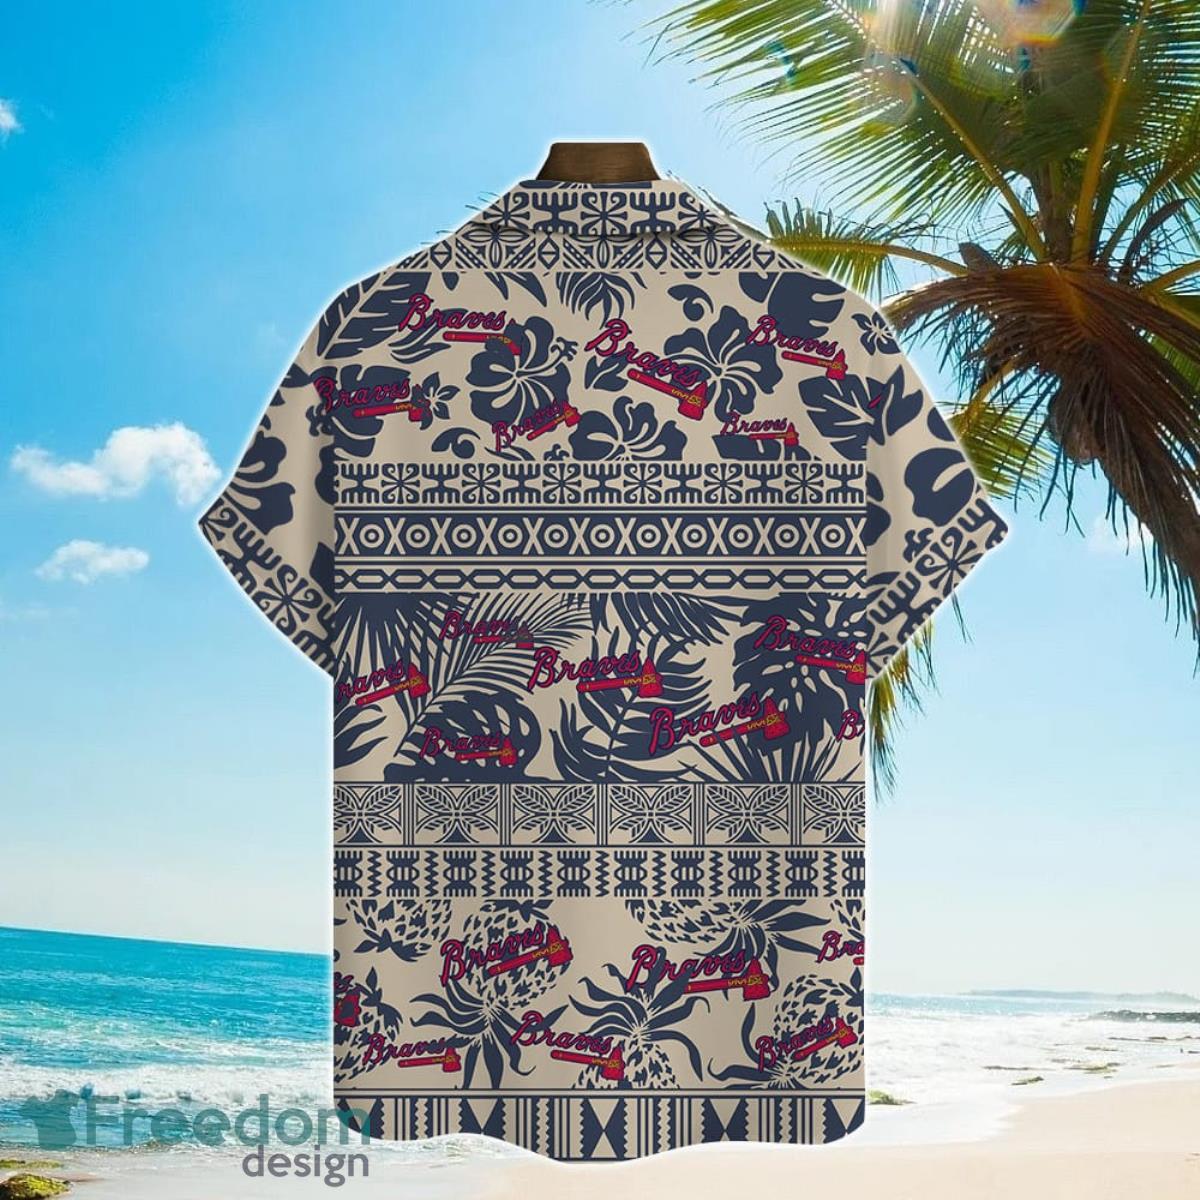 Cleveland Indians MLB Flower Hawaiian Shirt Special Gift For Men And Women  Fans - Freedomdesign